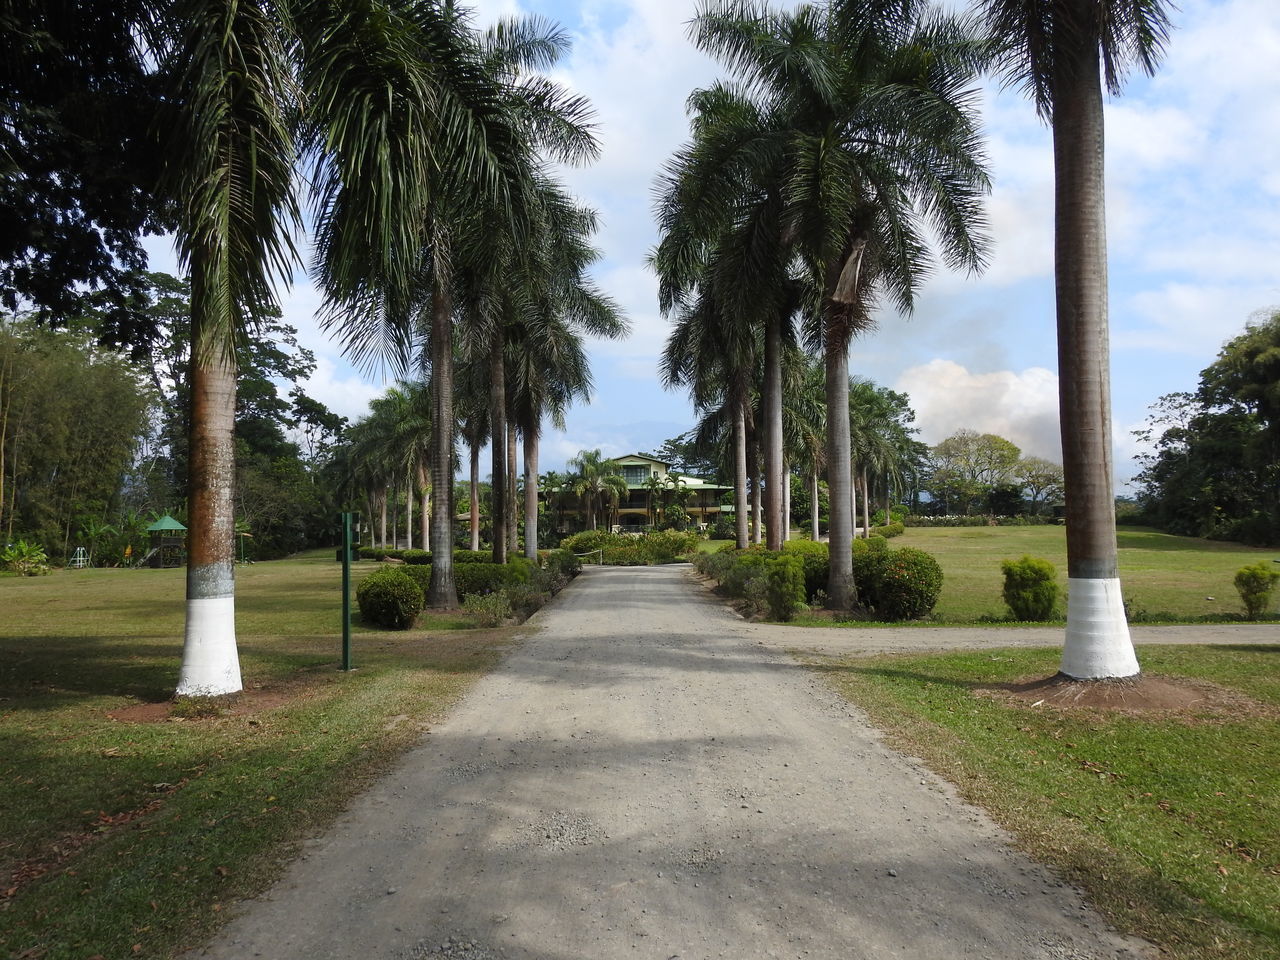 FOOTPATH AMIDST PALM TREES IN PARK